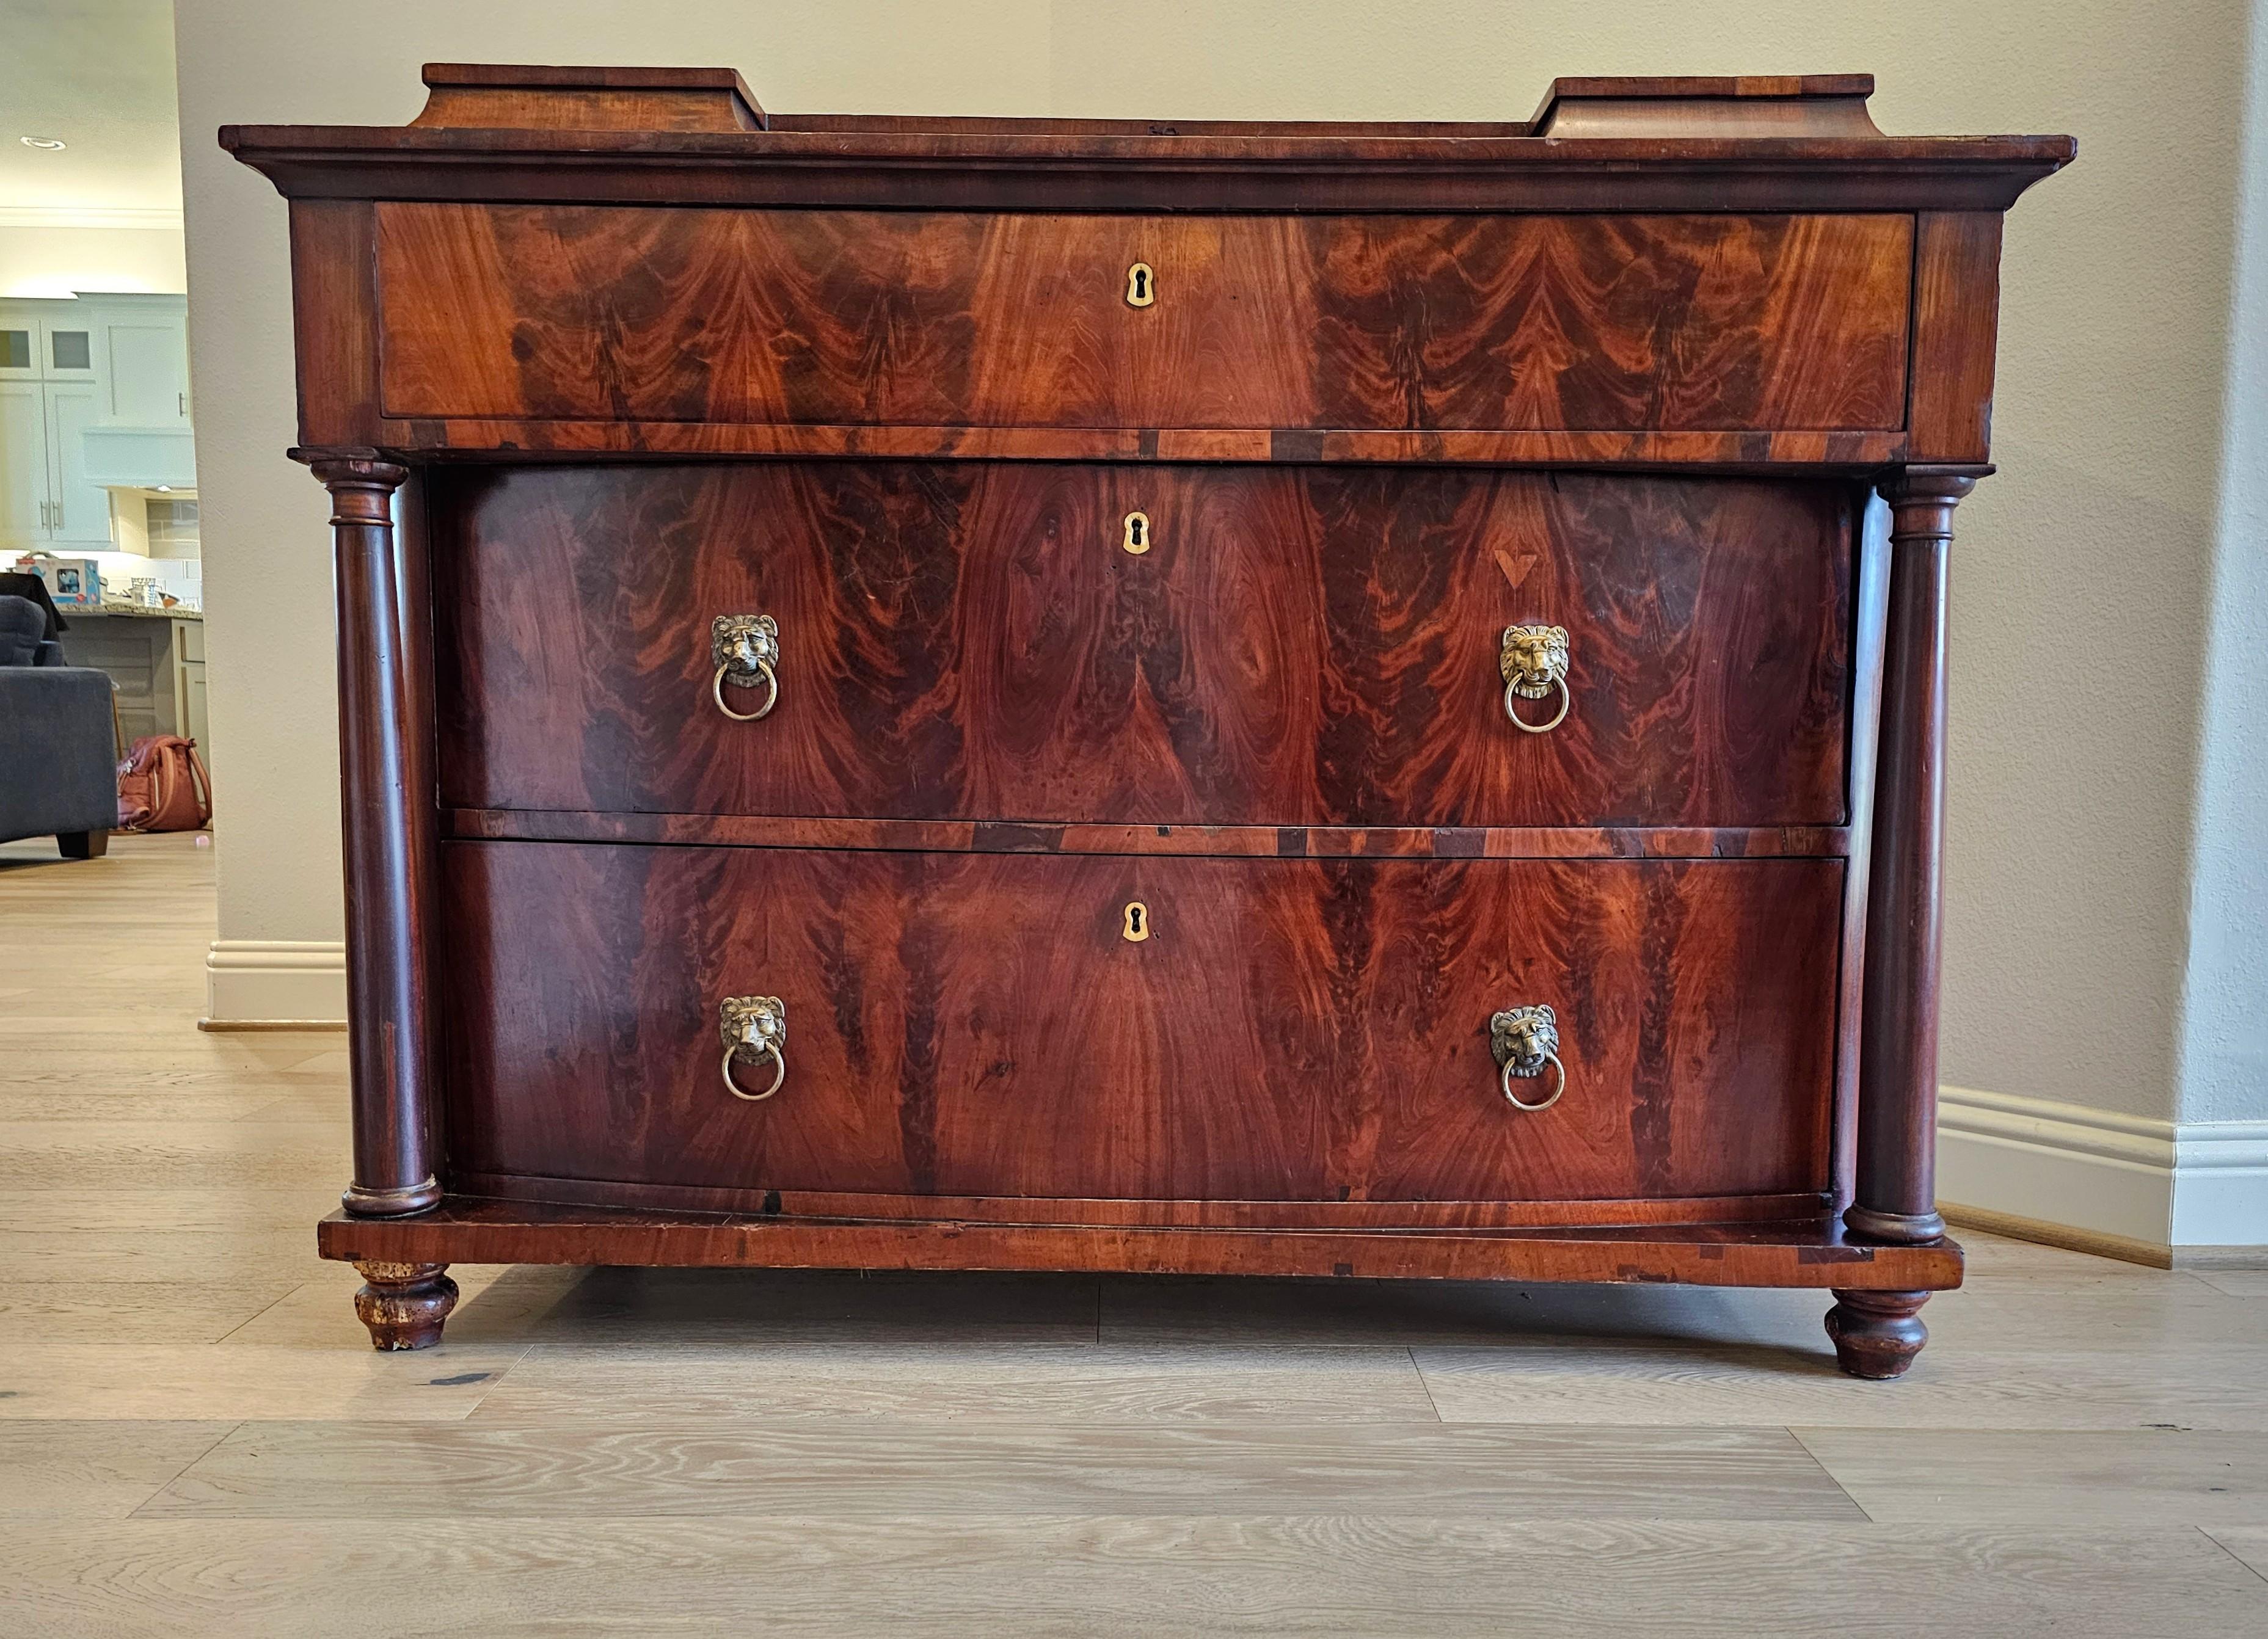 Antique Baltic Empire Biedermeier Period Flame Mahogany Chest of Drawers For Sale 2